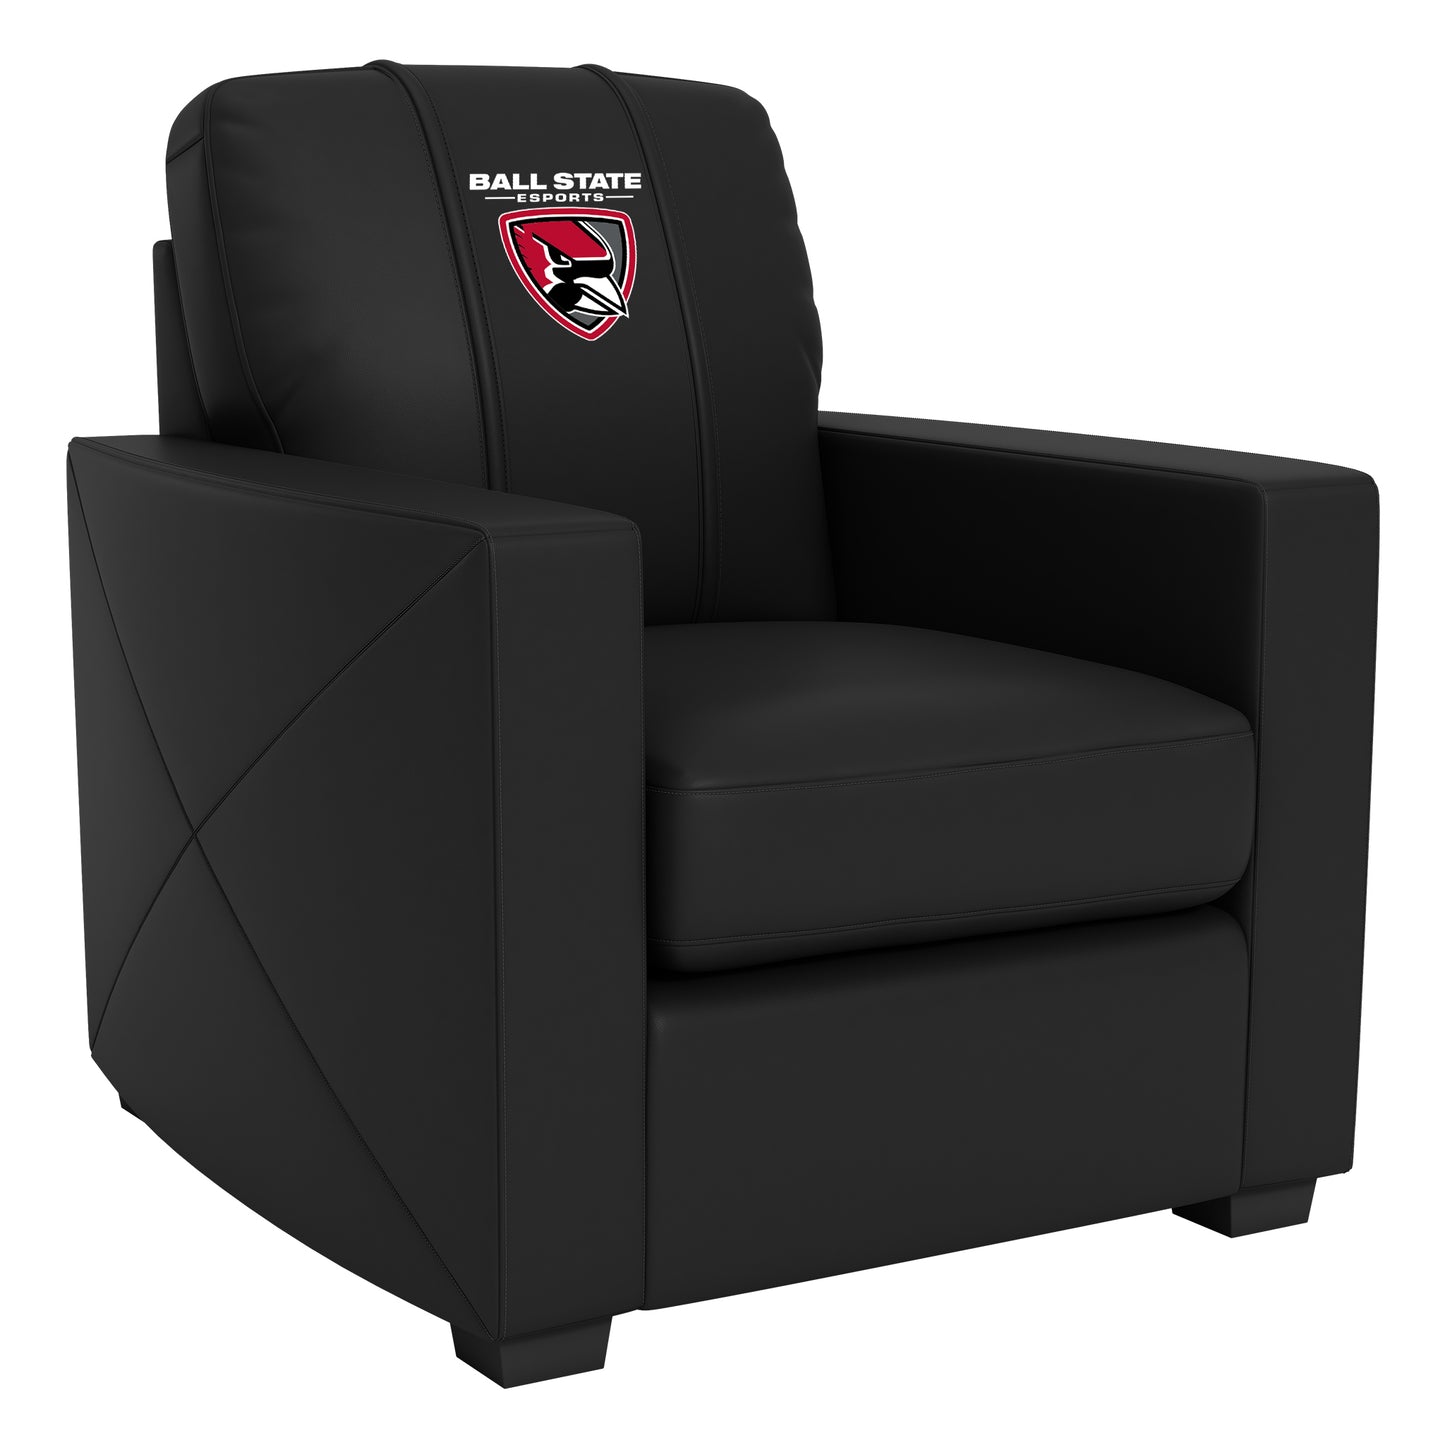 Silver Club Chair with Ball State Esports